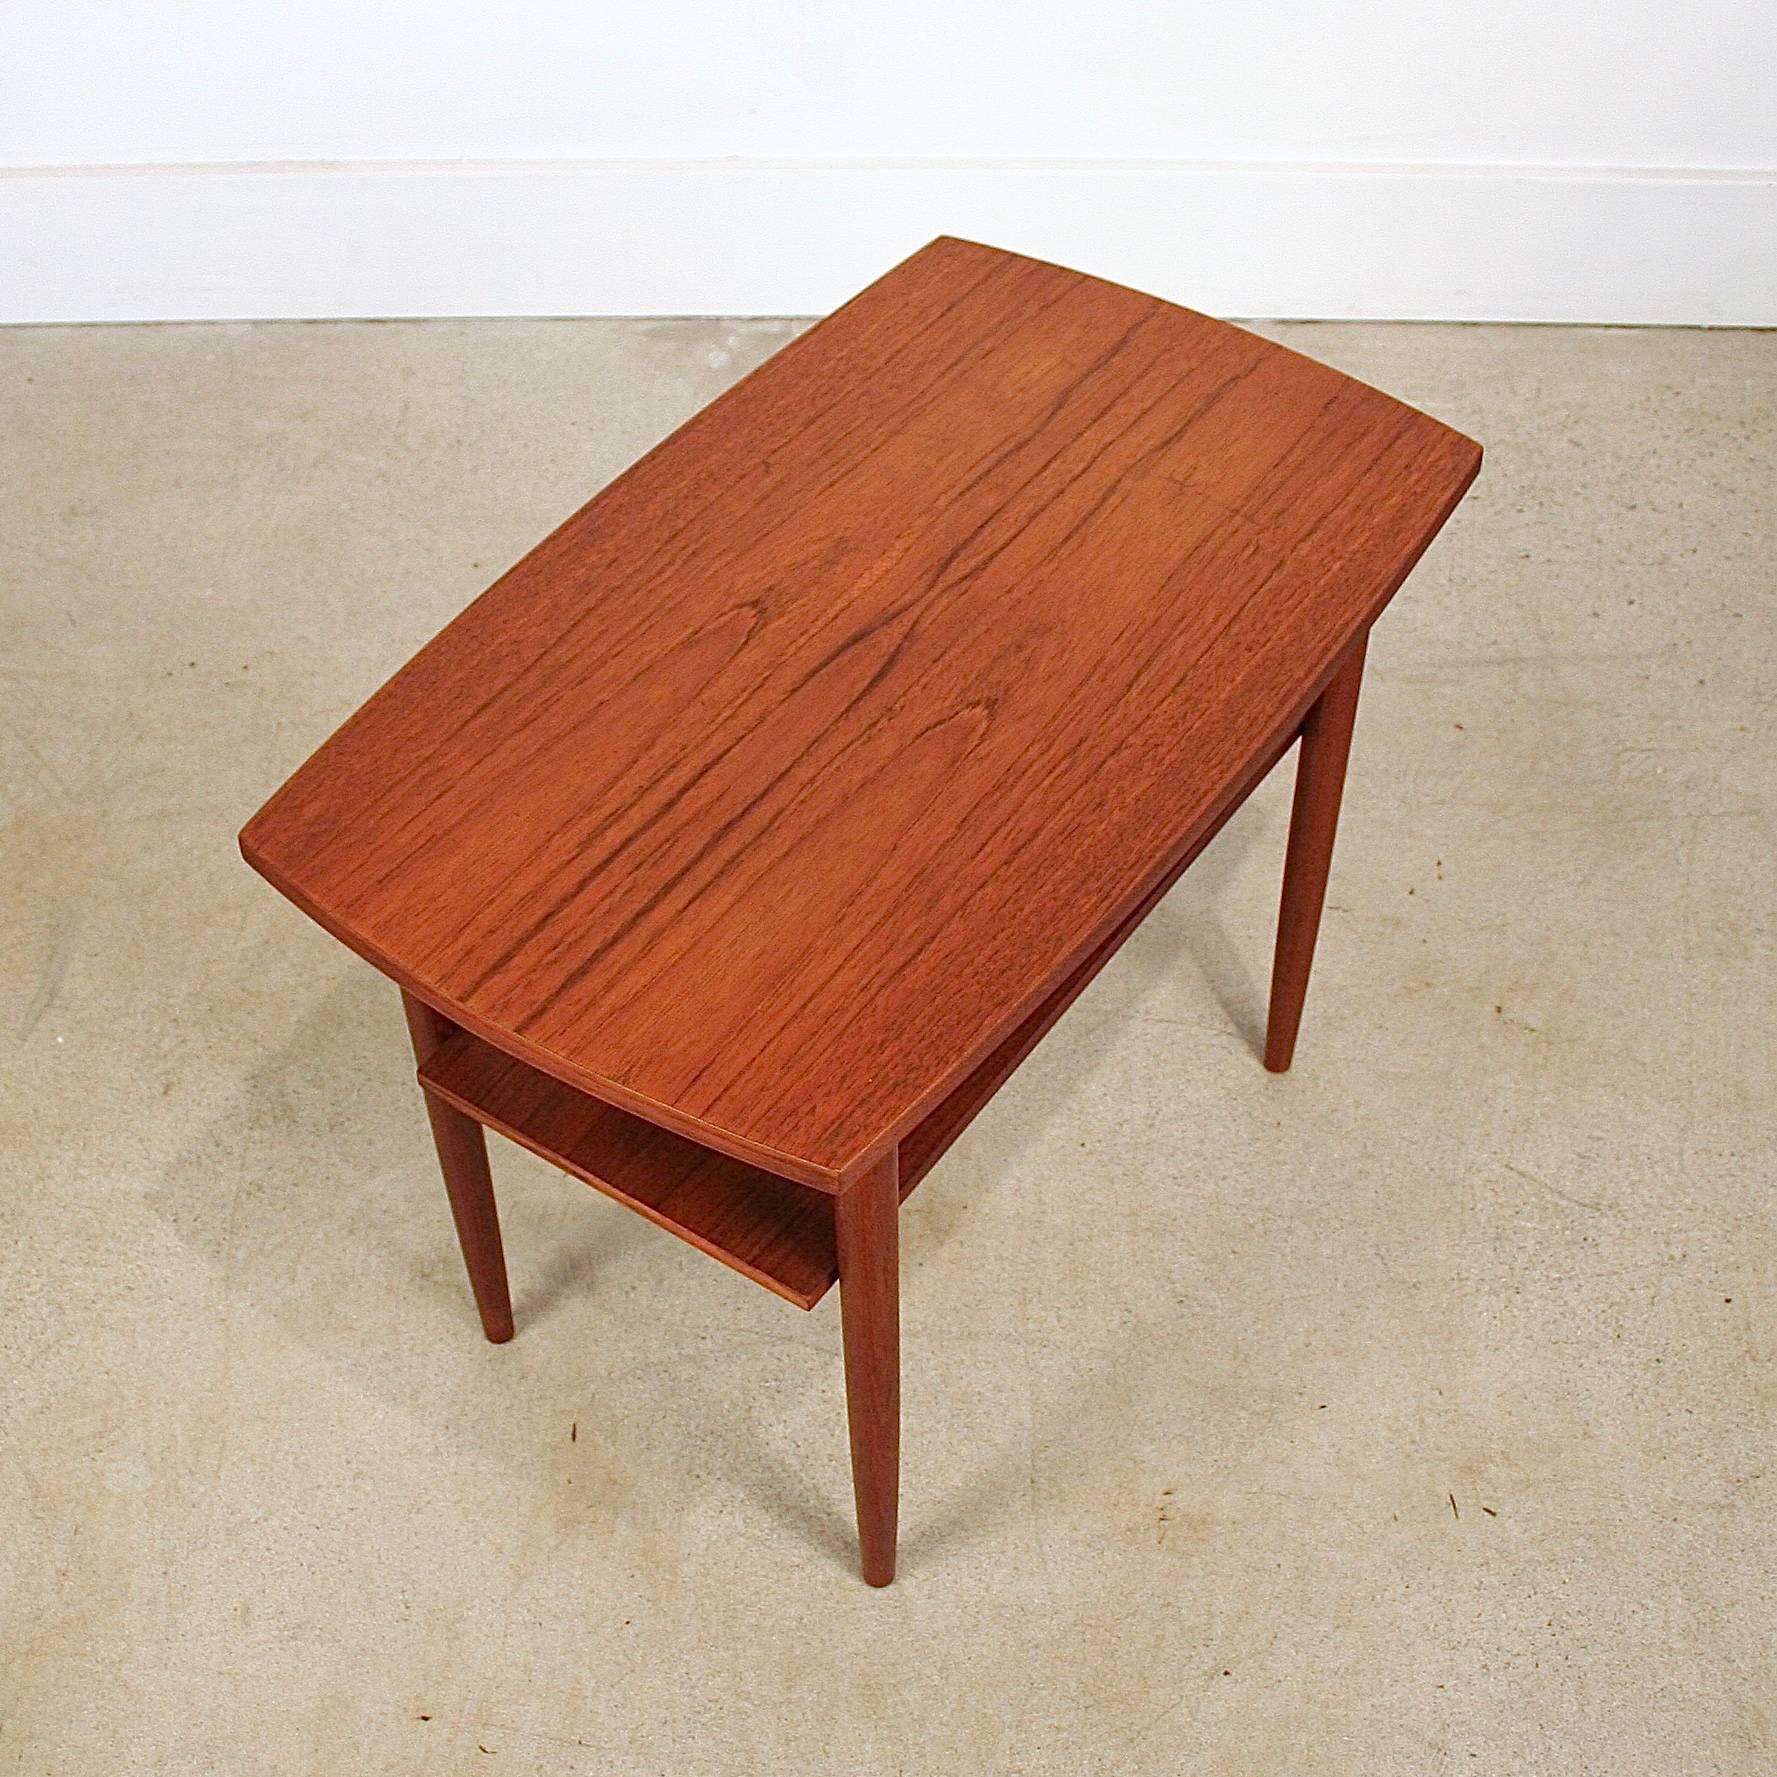 Vintage Danish Teak Side Table with Shelf In Excellent Condition For Sale In Vancouver, BC